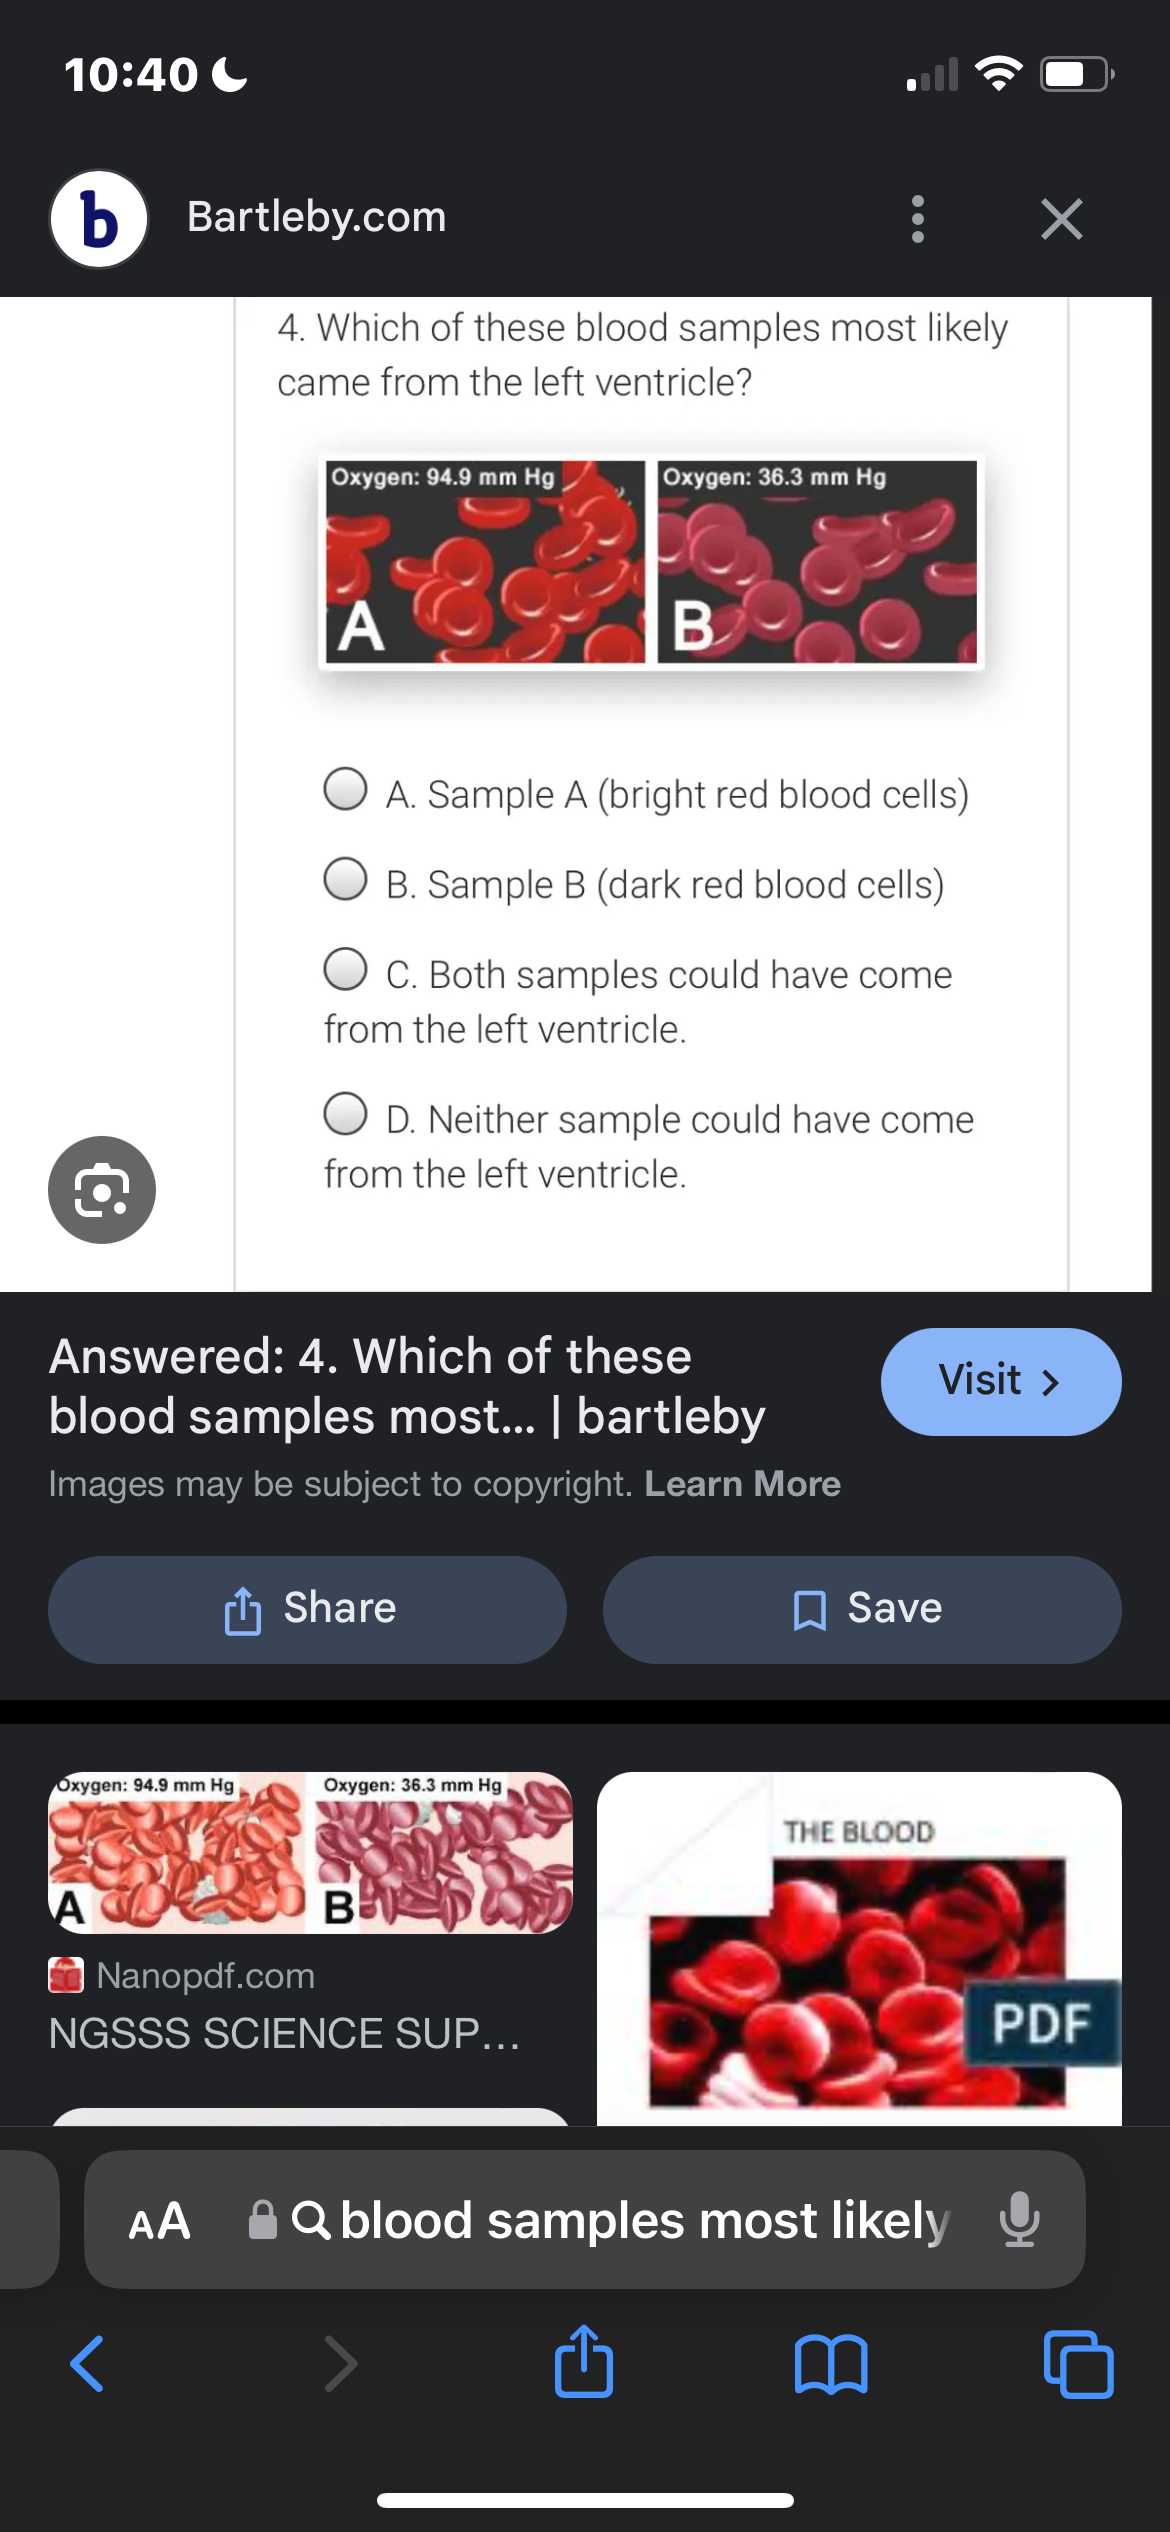 10:40-
b Bartleby.com
4. Which of these blood samples most likely
came from the left ventricle?
Oxygen: 94.9 mm Hg
Oxygen: 36.3 mm Hg
A
B
A. Sample A (bright red blood cells)
B. Sample B (dark red blood cells)
C. Both samples could have come
from the left ventricle.
○ D. Neither sample could have come
from the left ventricle.
Answered: 4. Which of these
blood samples most... | bartleby
Images may be subject to copyright. Learn More
Share
☐ Save
Oxygen: 94.9 mm Hg
Oxygen: 36.3 mm Hg
THE BLOOD
A
Nanopdf.com
B
NGSSS SCIENCE SUP...
☑
Visit >
PDF
AA
⚫ Q blood samples most likely ↓